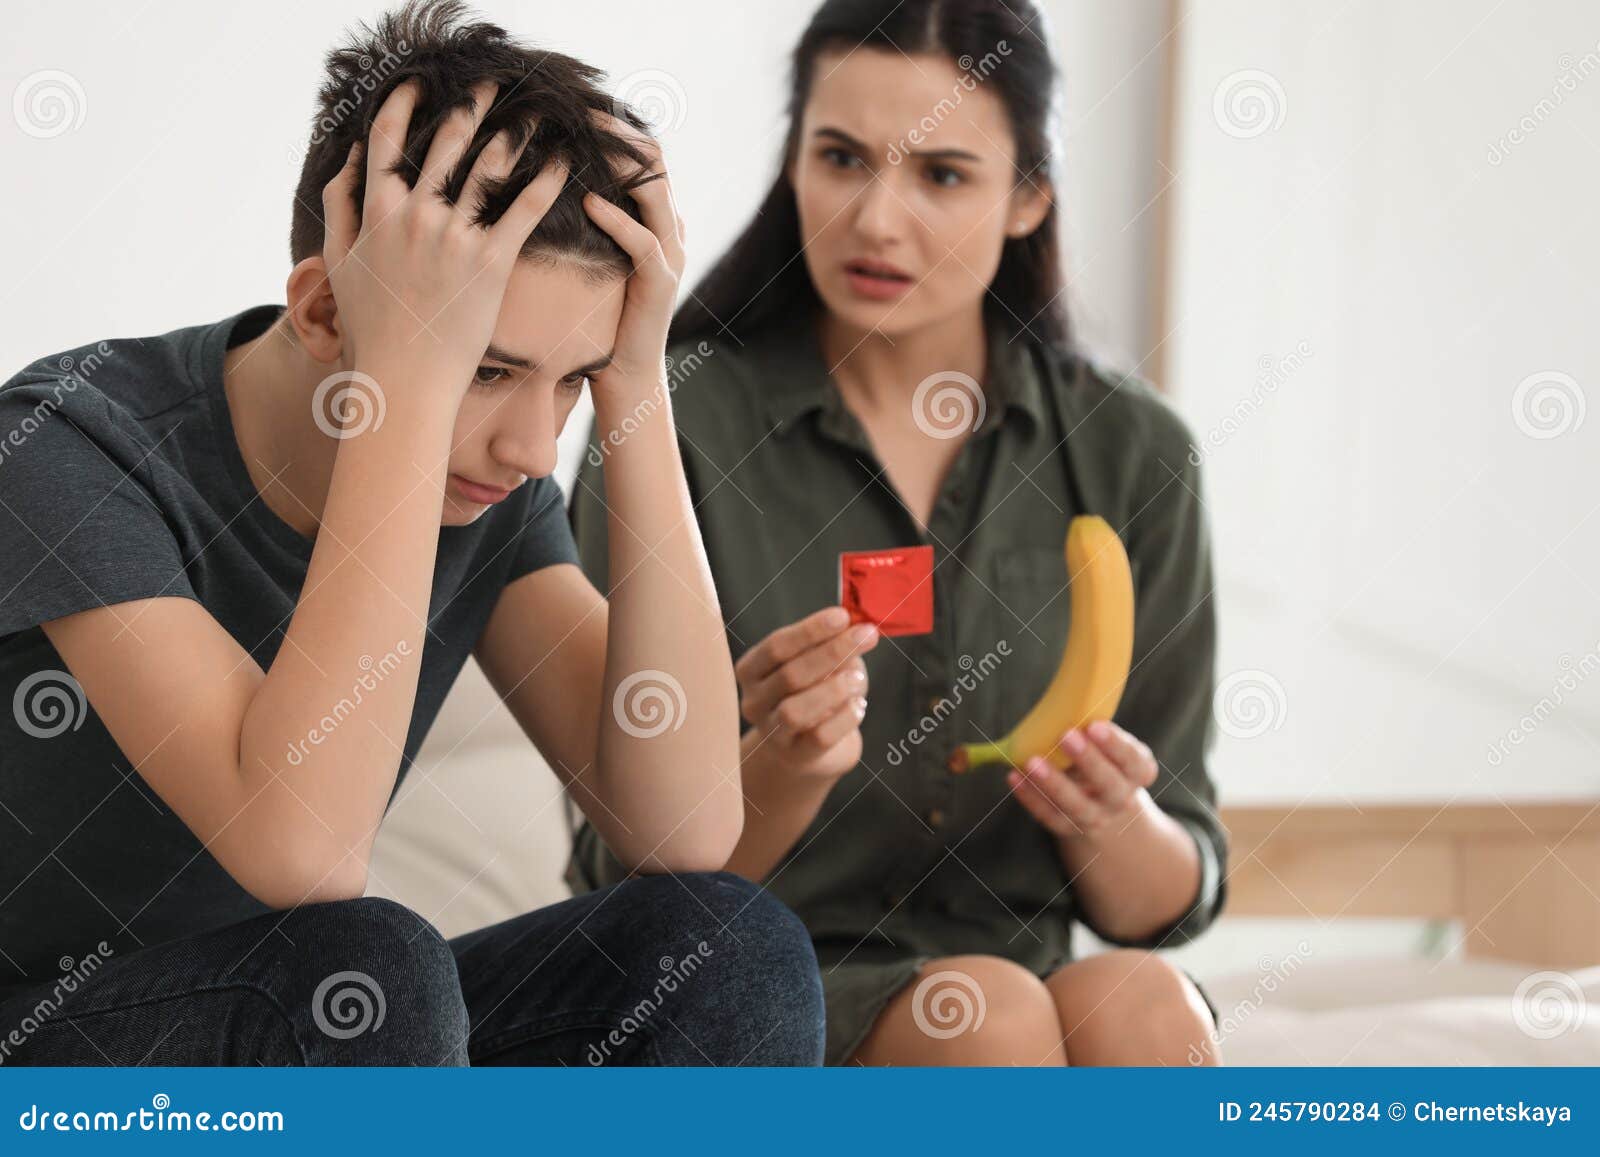 Mother Talking with Her Teenage Son about Contraception at Home picture